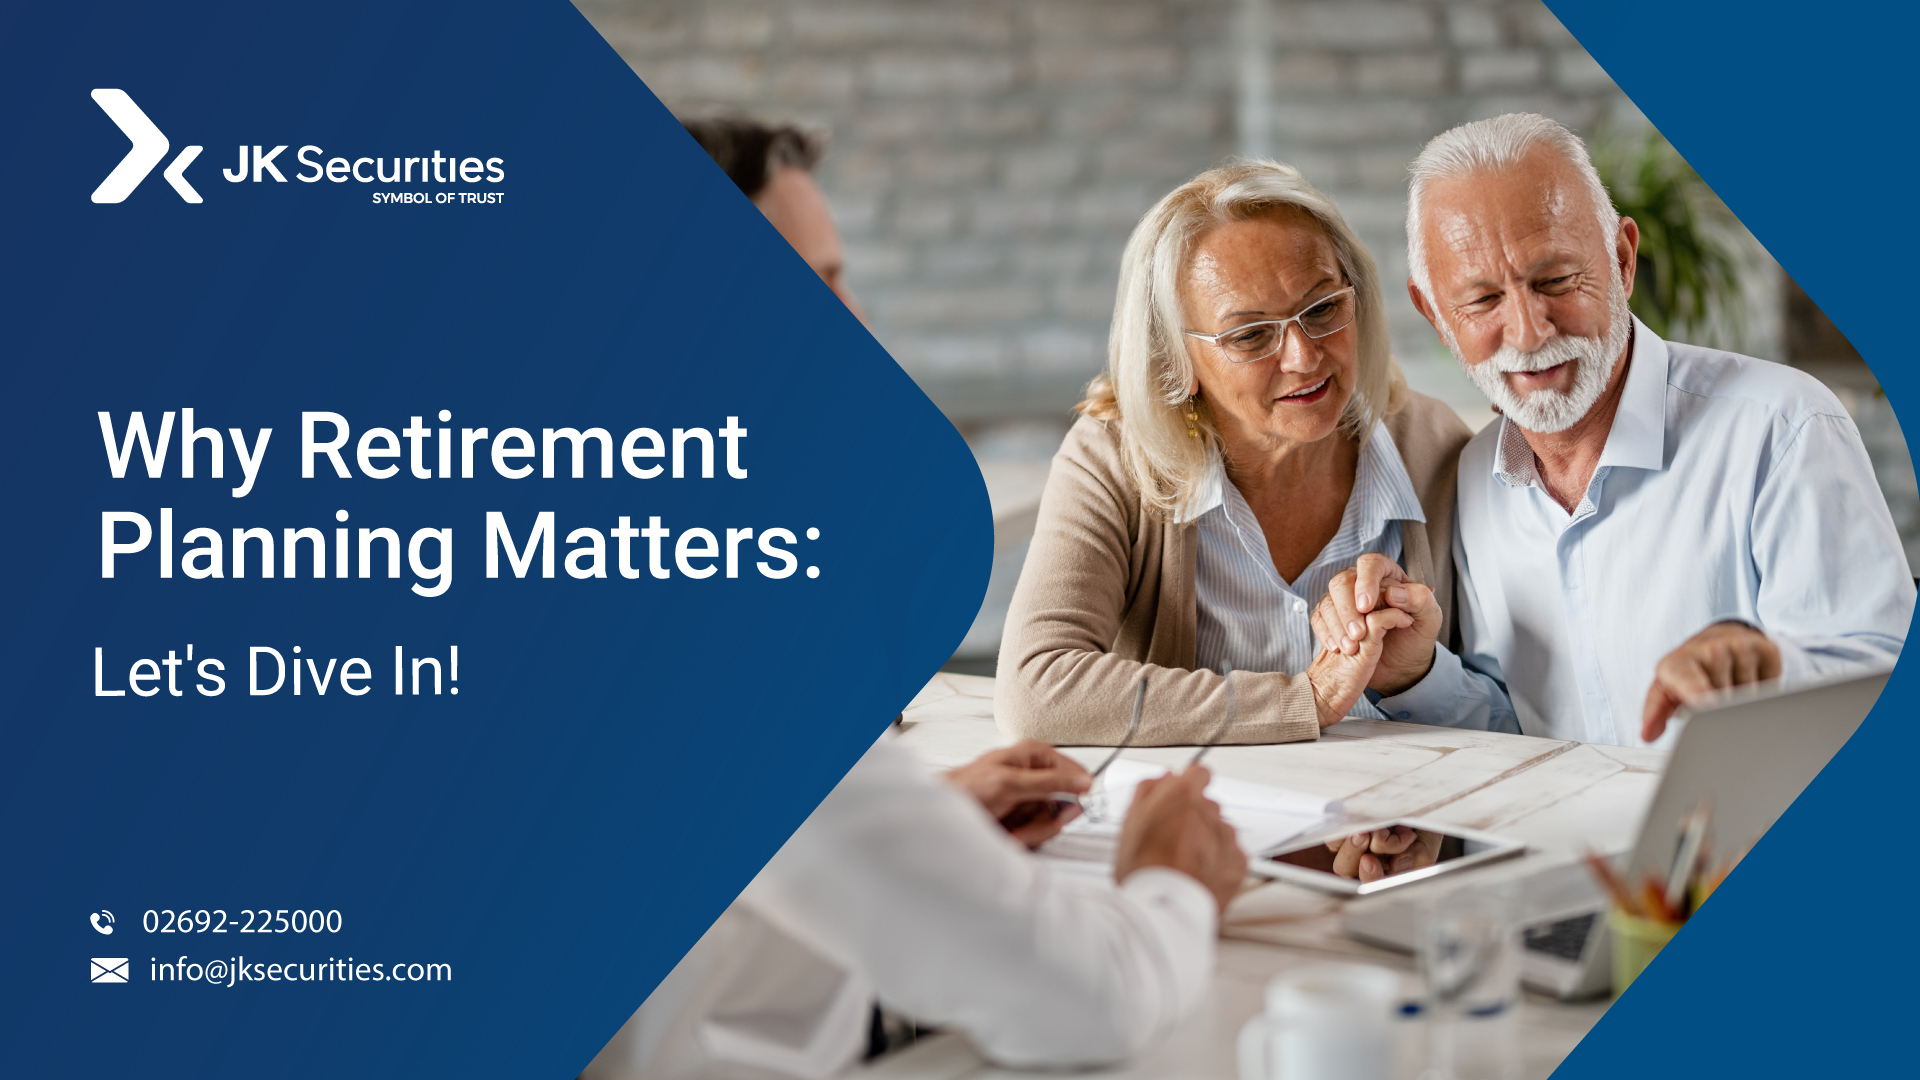 Why Retirement Planning Matters: Let's Dive In!